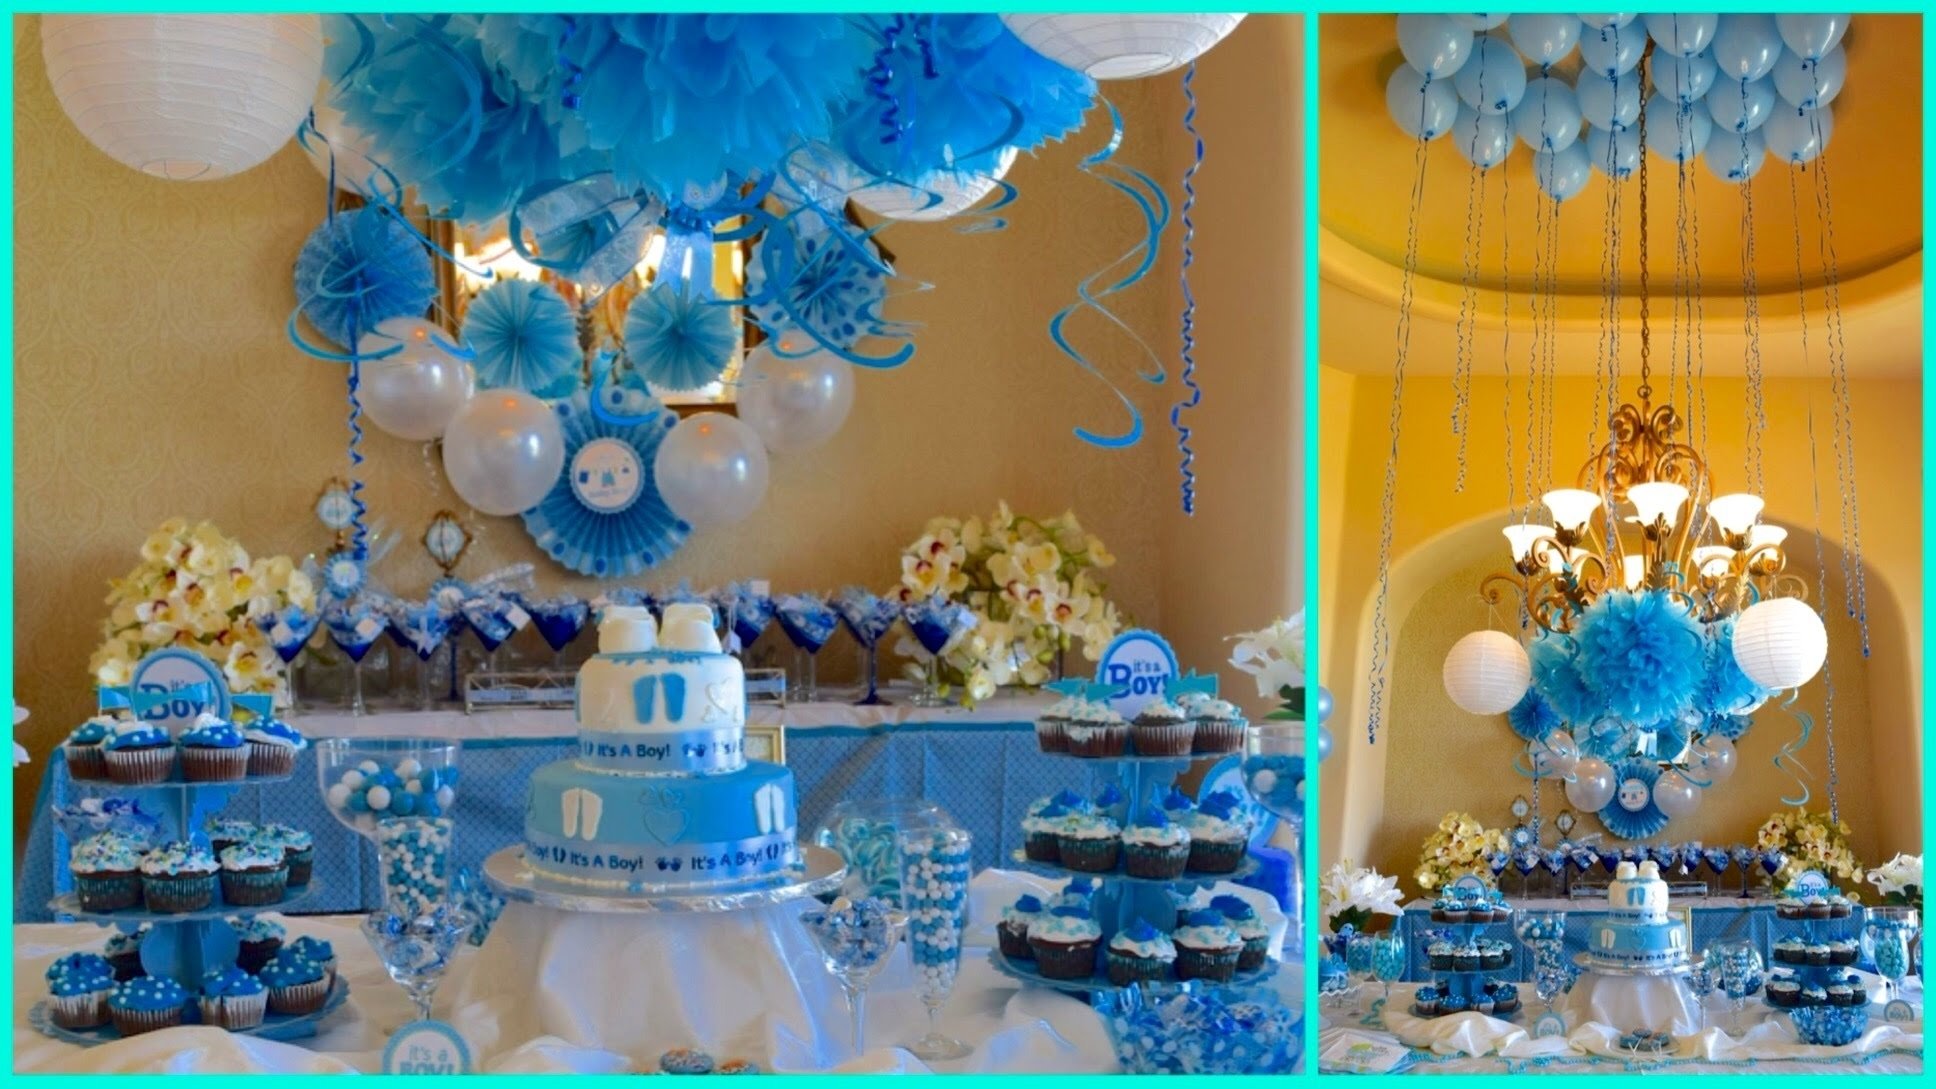 10 Great Baby Boy Themed Baby Shower Ideas baby shower ideas for boy blue theme youtube 1 2022